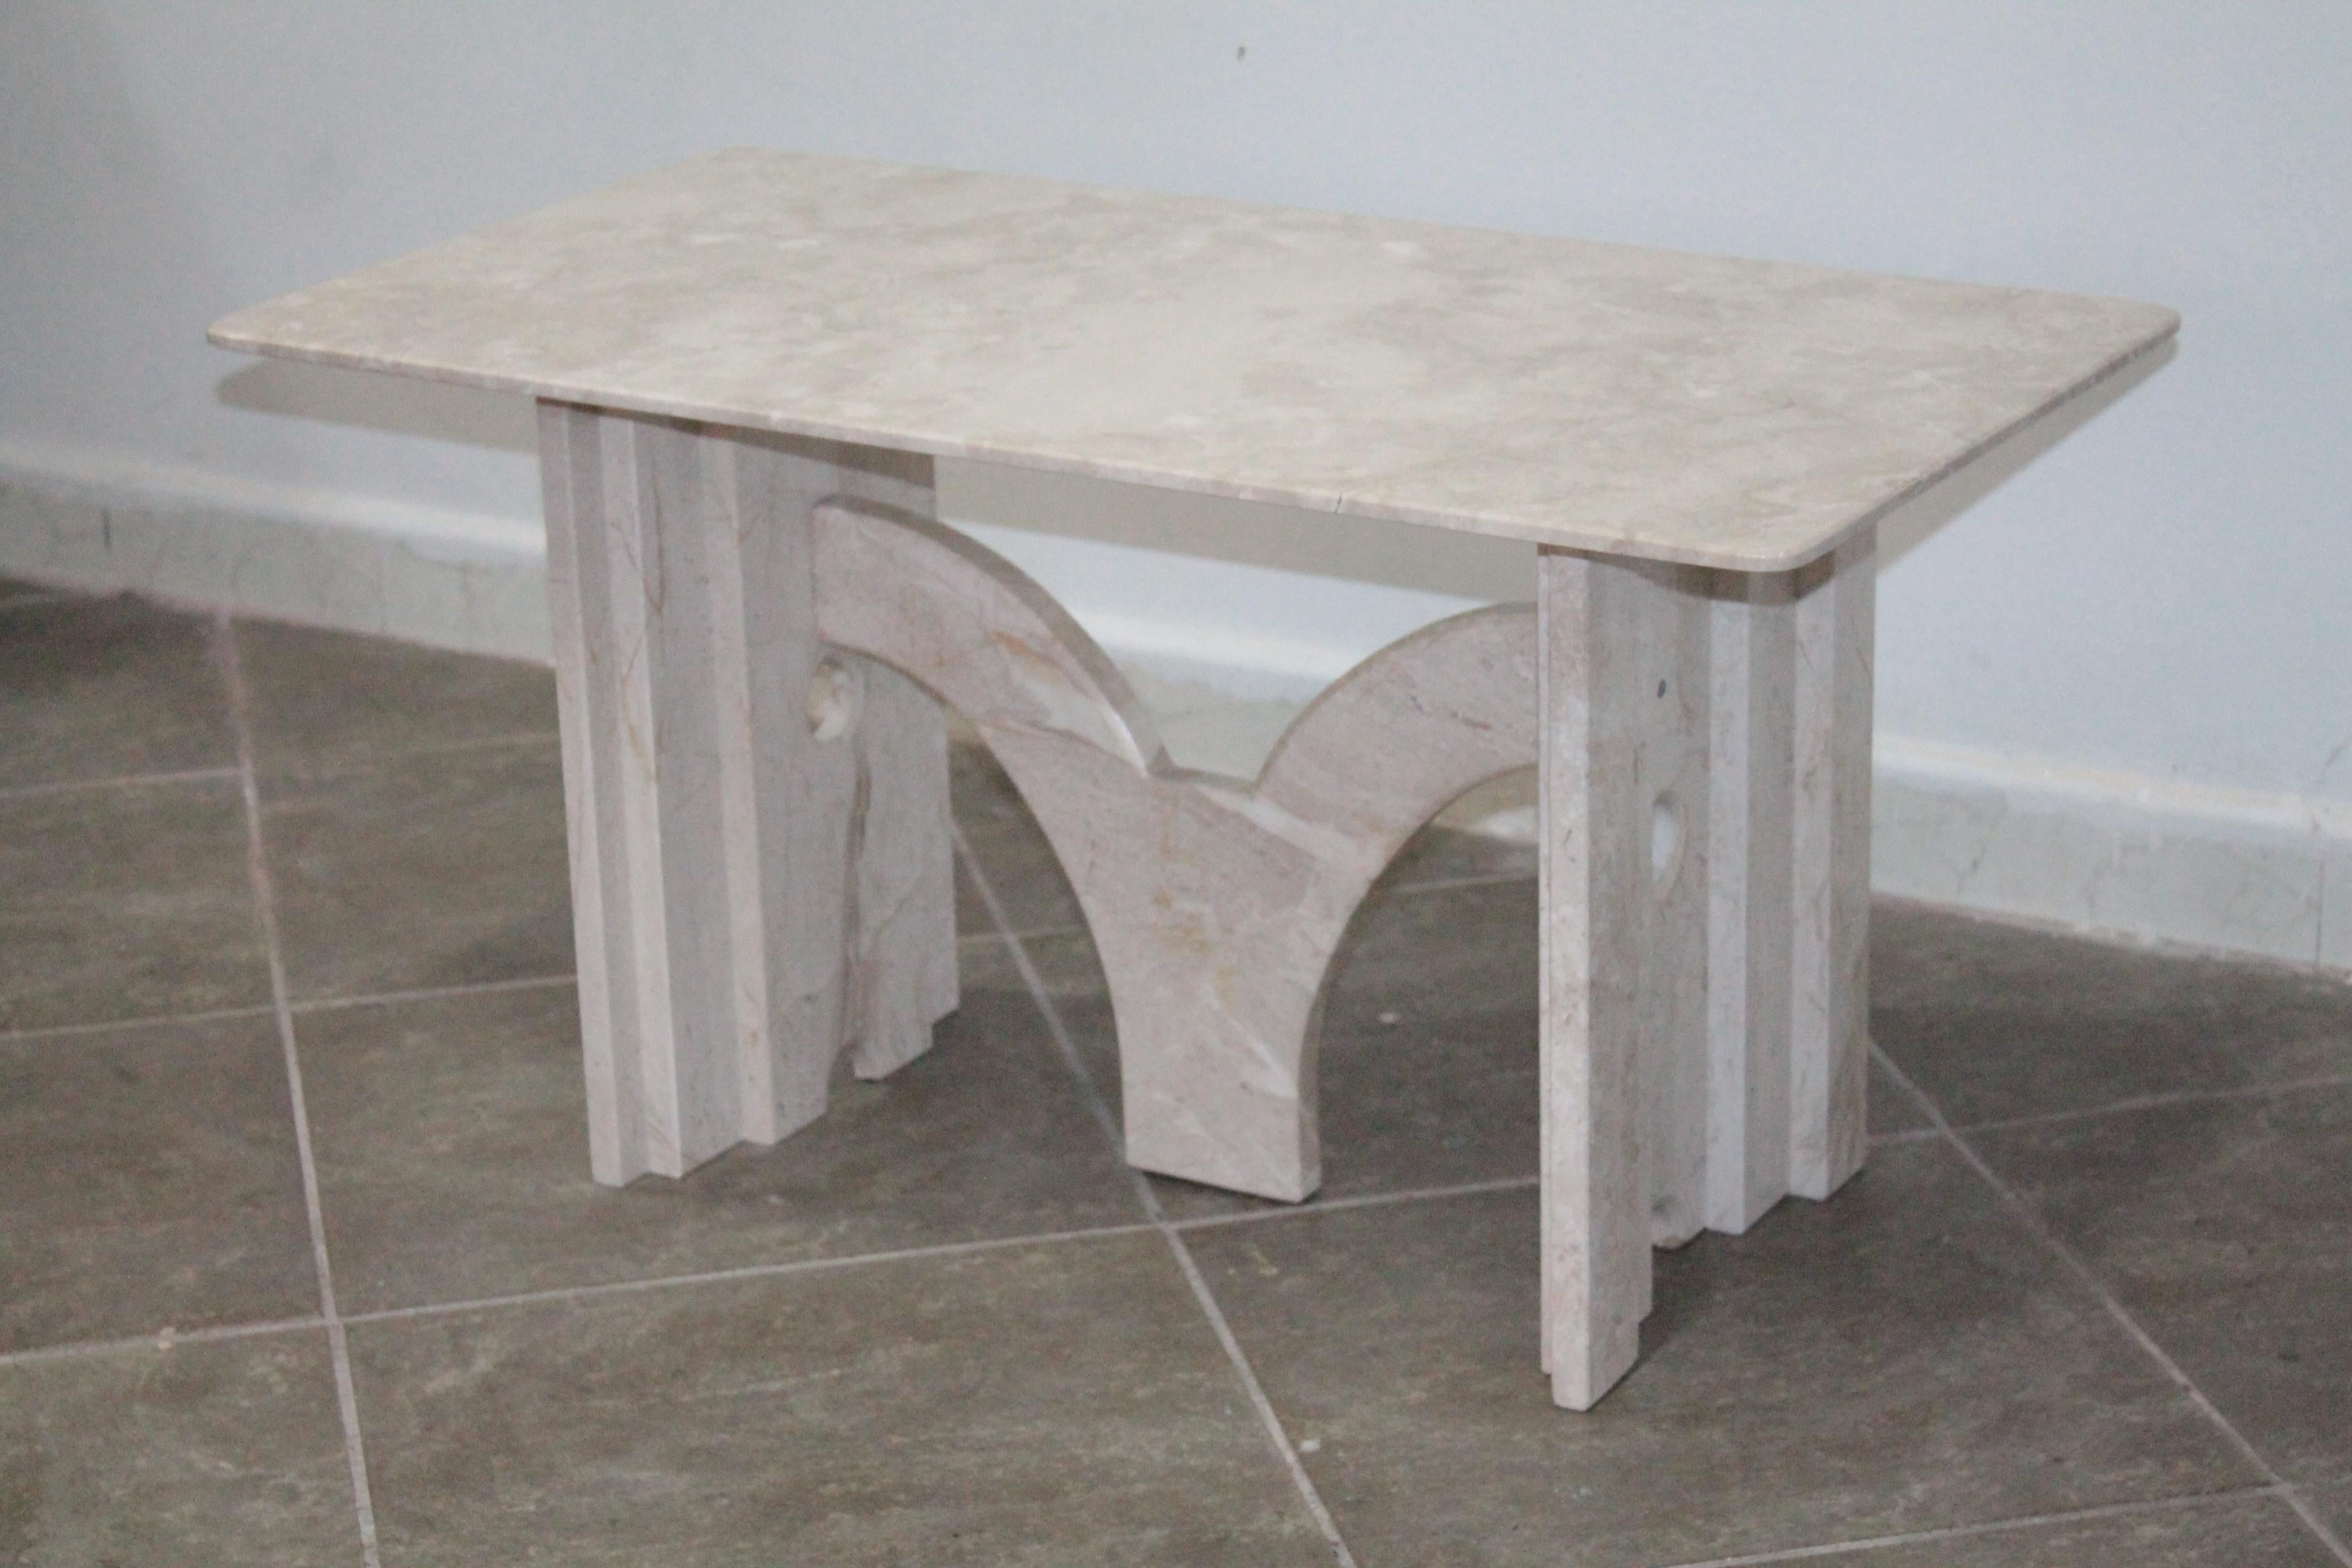 Italian coffee table daino marble 1980s in the style of Carlo Scarpa.
Condition: normal signs of aging, the foot has small chips on the bottom.